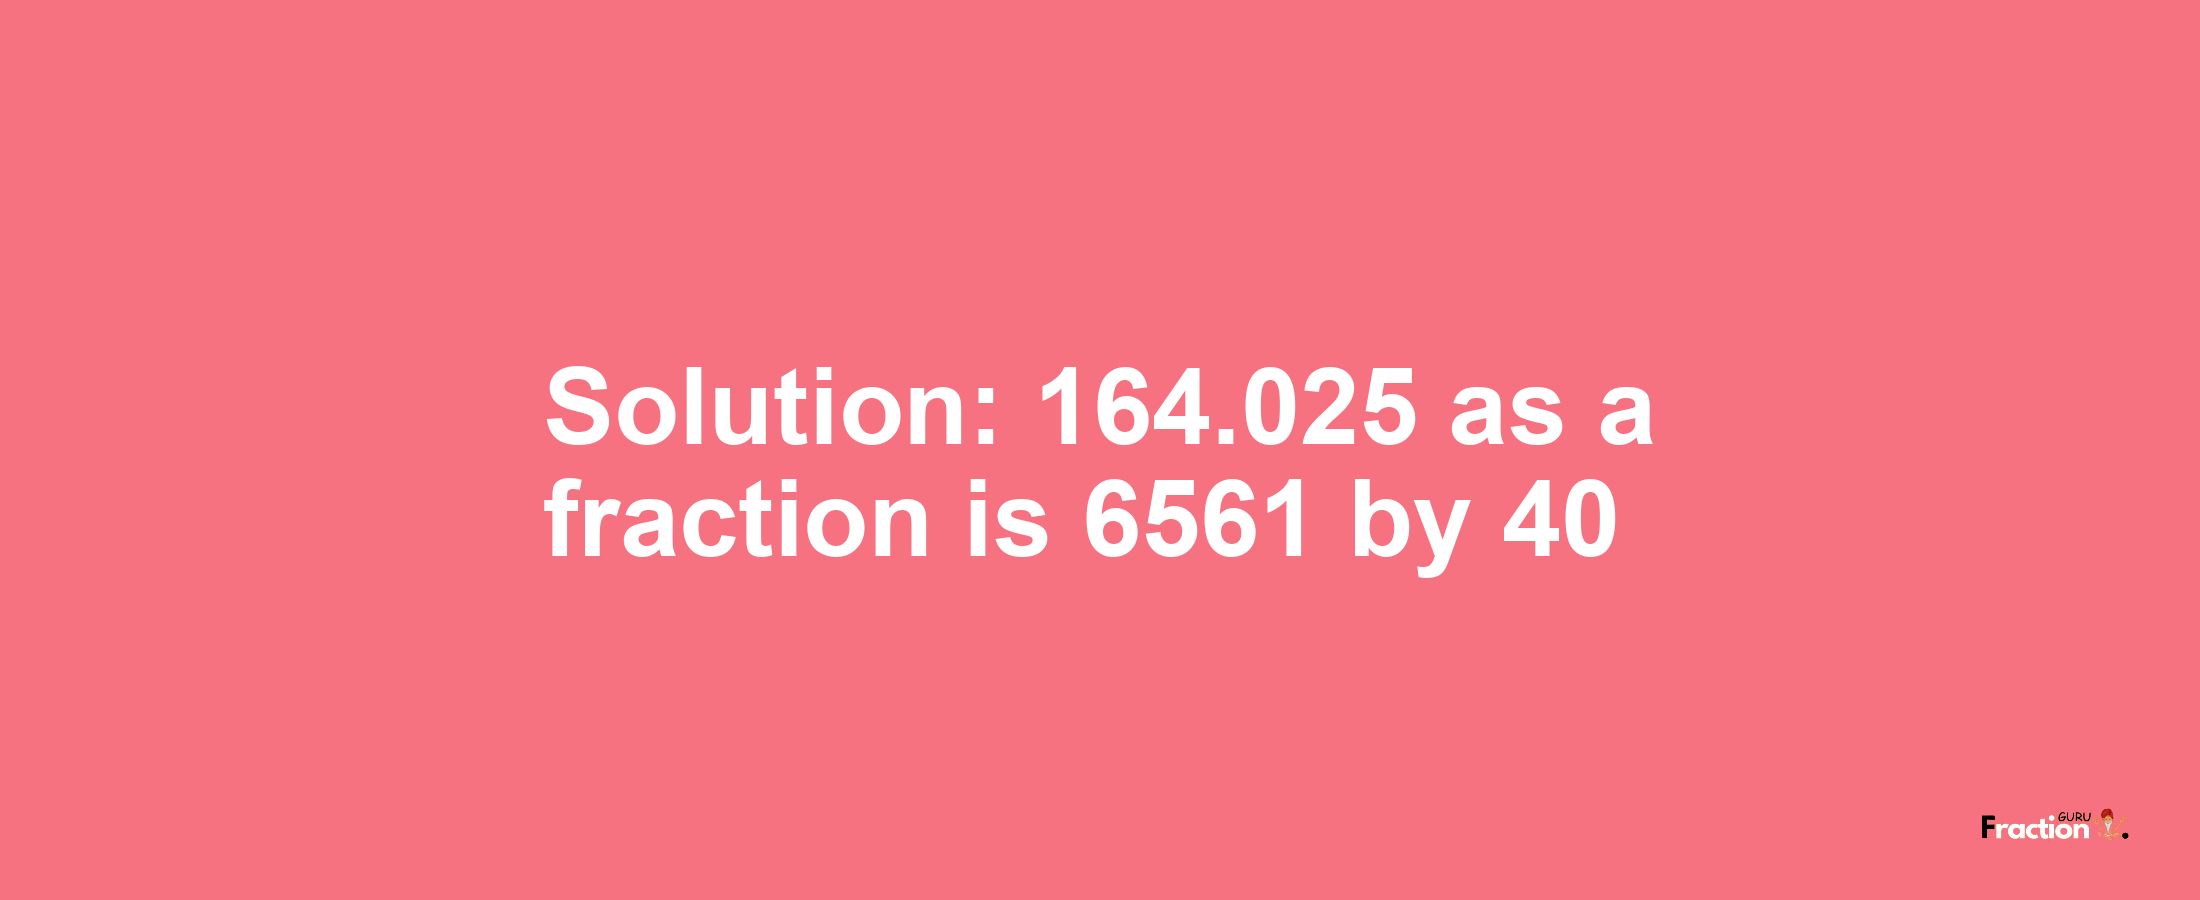 Solution:164.025 as a fraction is 6561/40